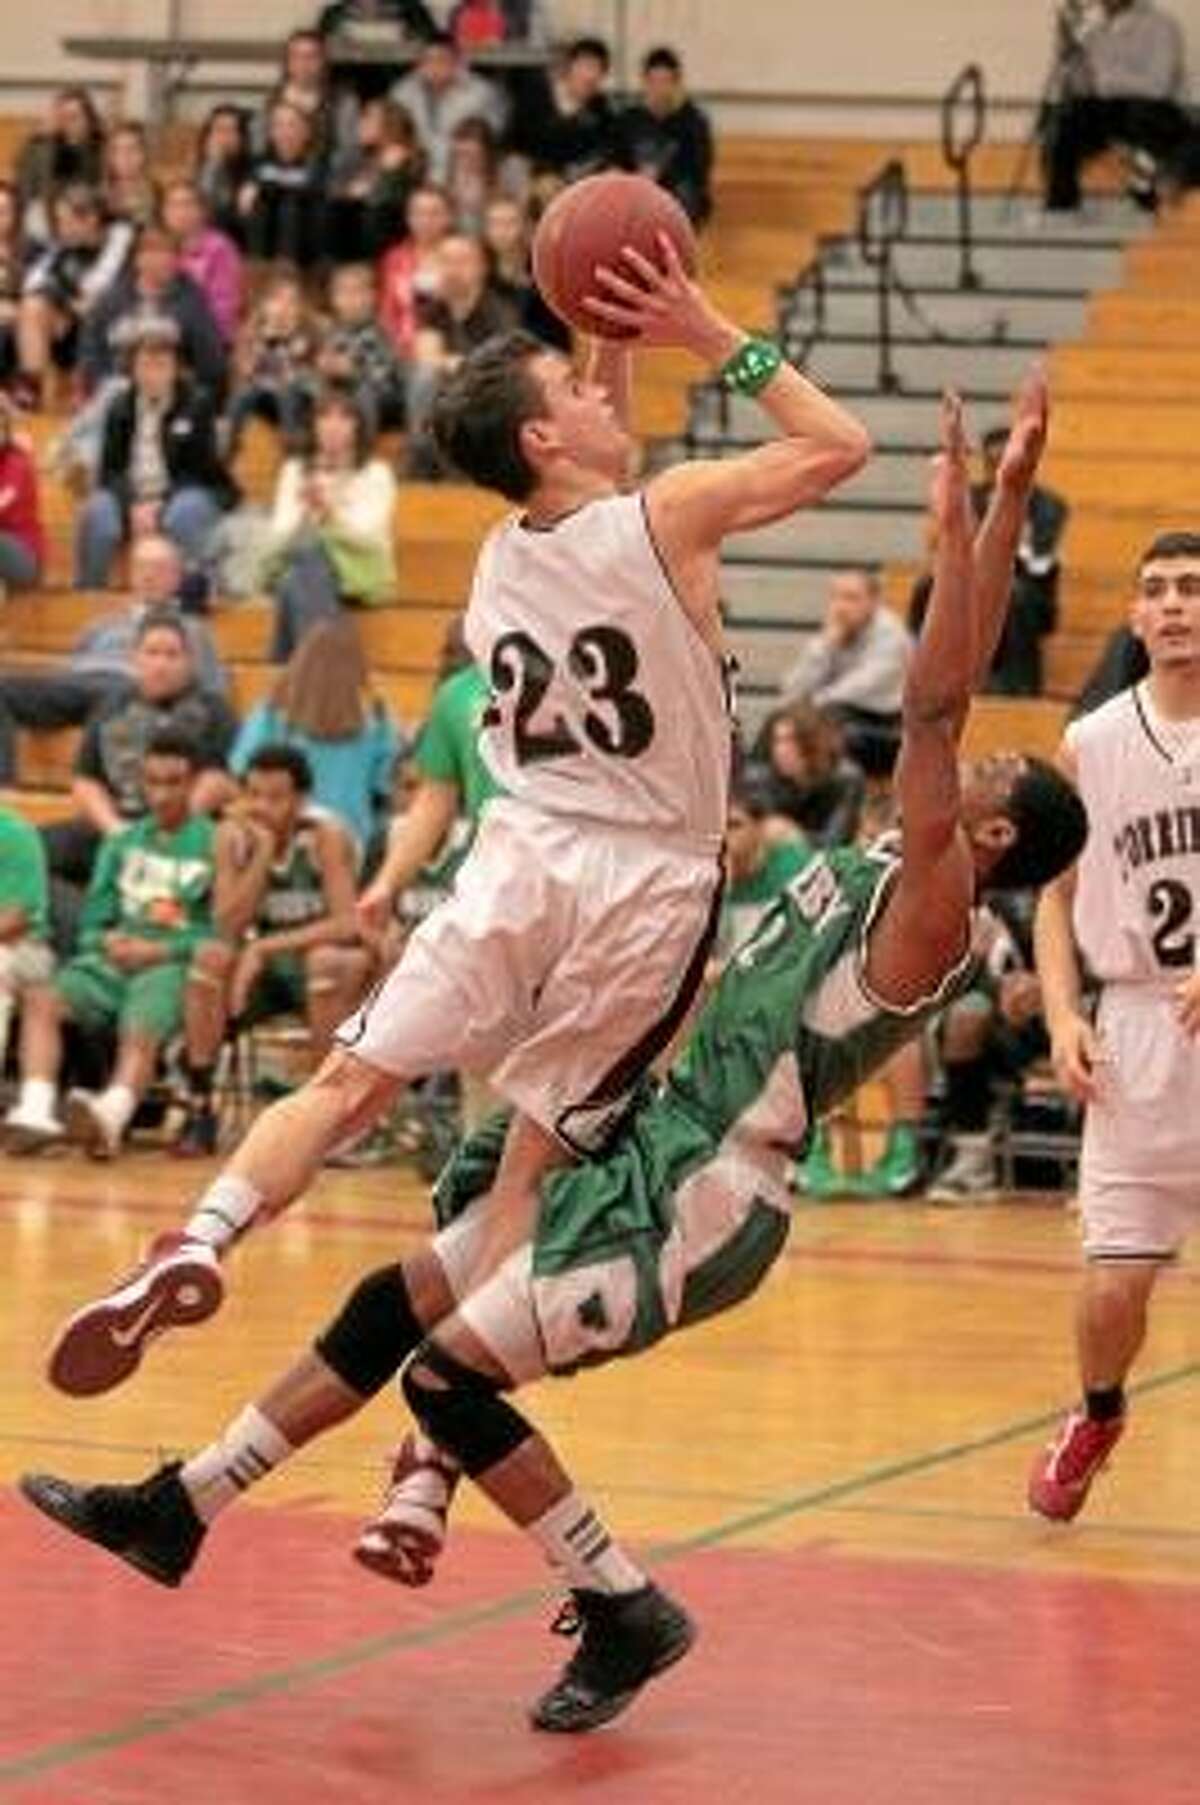 Torrington's Austin Kelson (23) collides with a Wilby defender as he goes for a layup. Marianne Killackey/Special to Register Citizen.